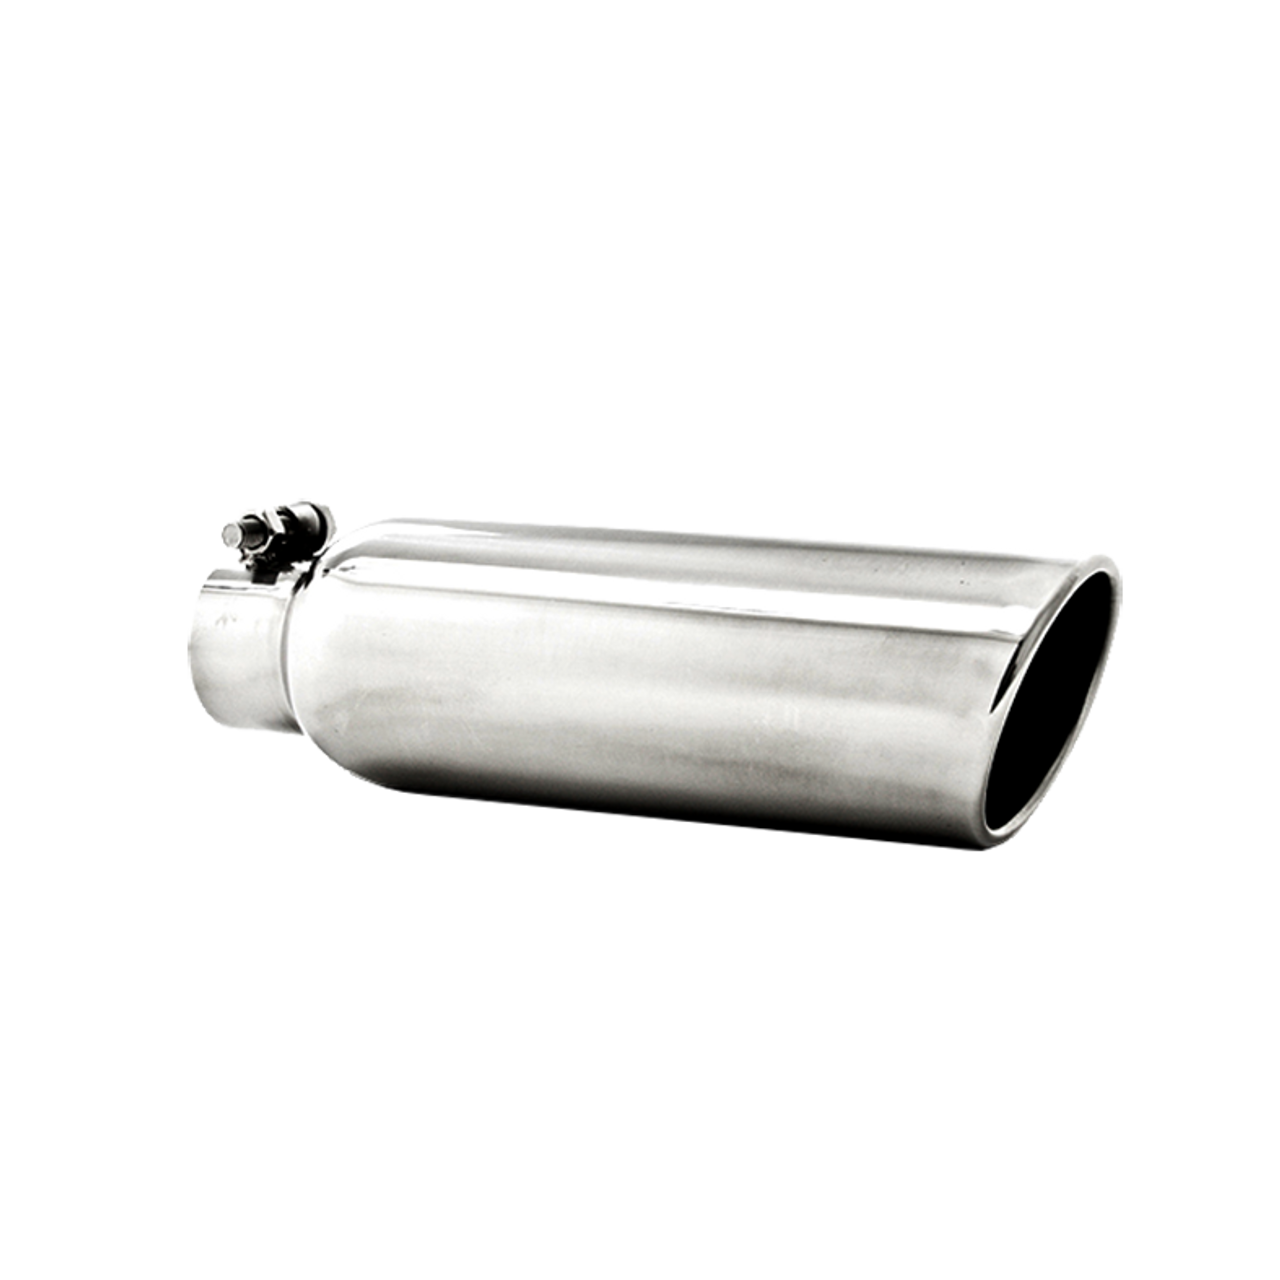 2.5 ID x 3.5OD x 7L Black Exhaust tip Double Wall Weld On Muffler Tail Pipe Stainless Steel Black Coated 